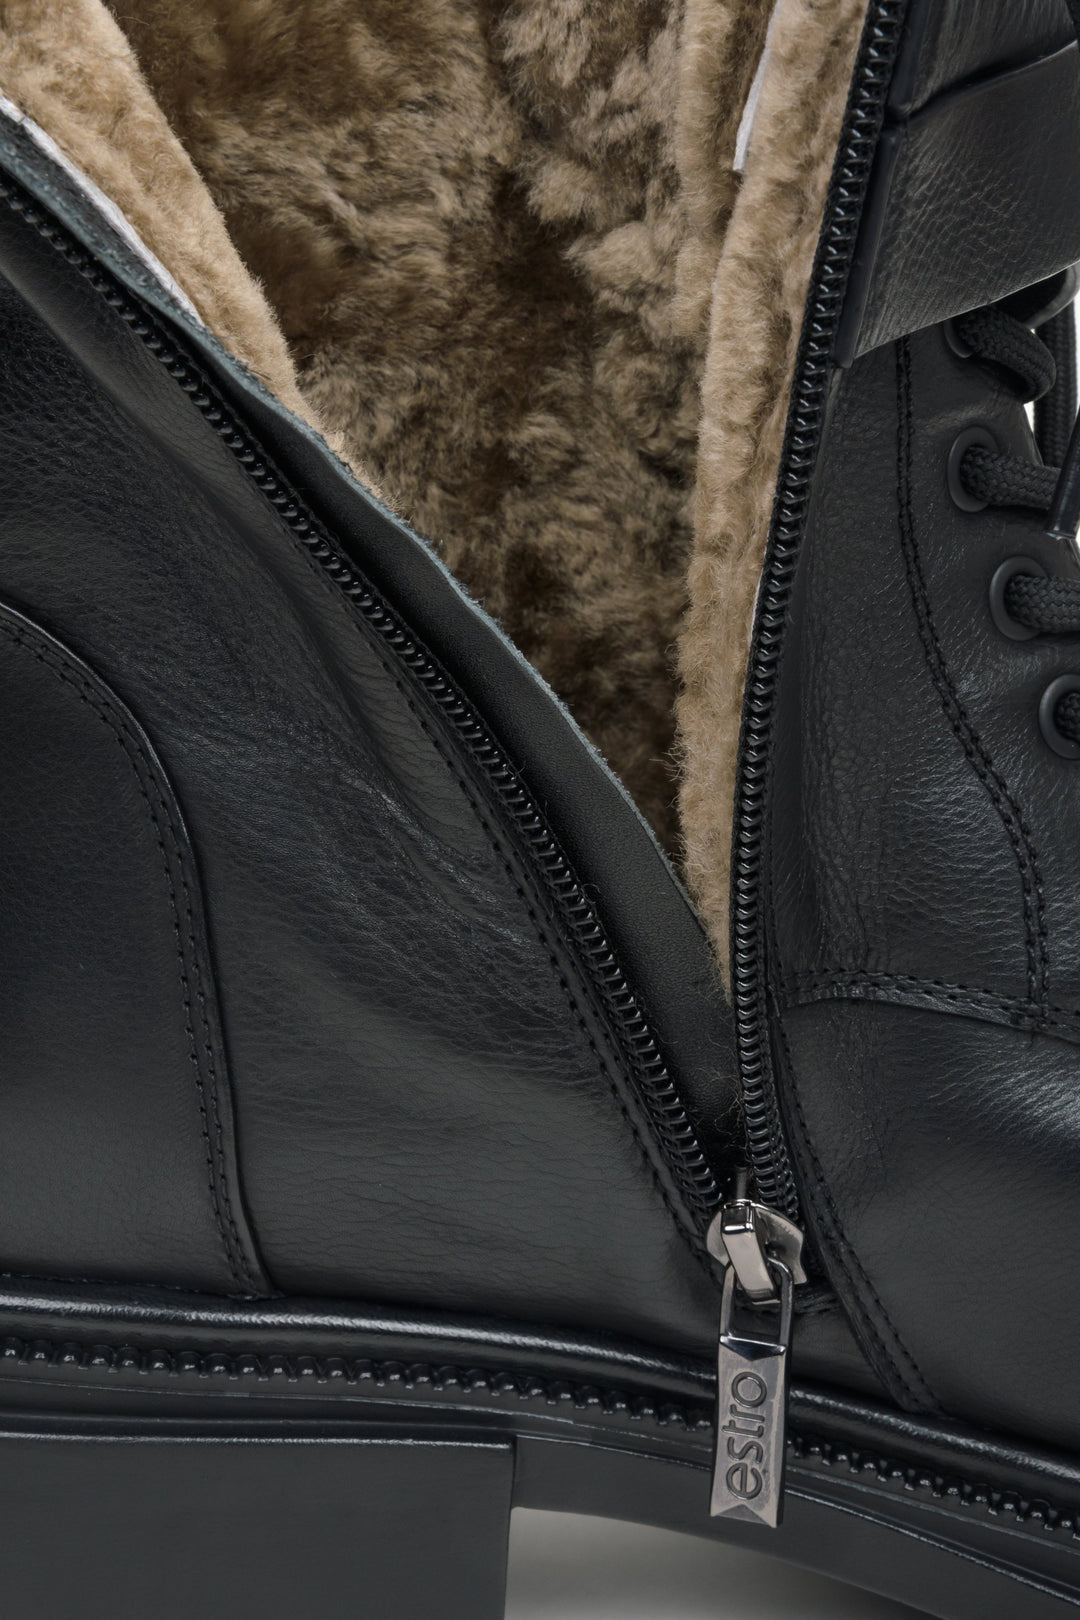 Women's black leather boots with fur lining by Estro - close-up on details.